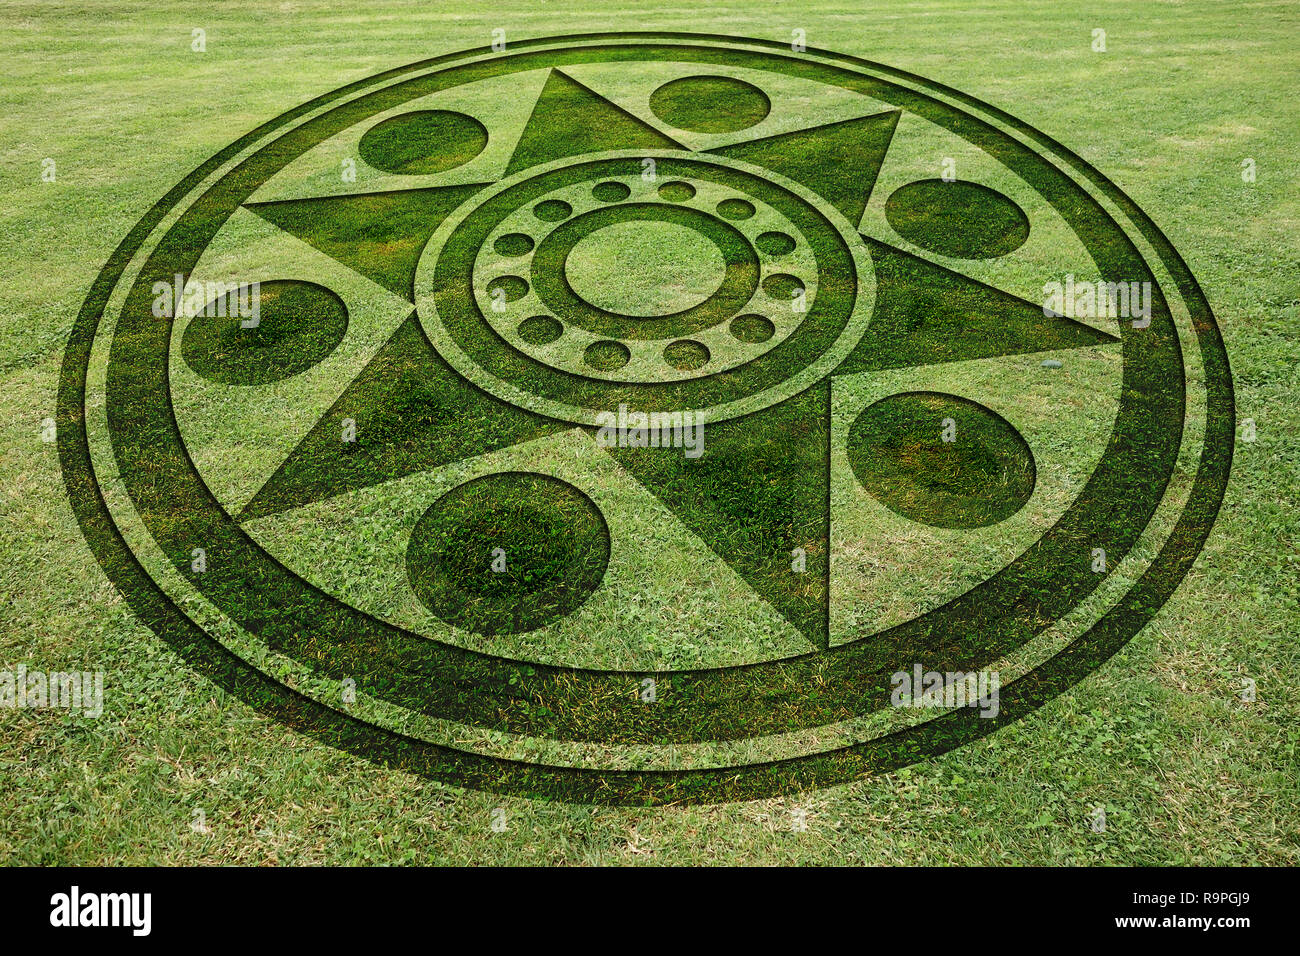 Concentric circles and star fake crop circle in the meadow Stock Photo